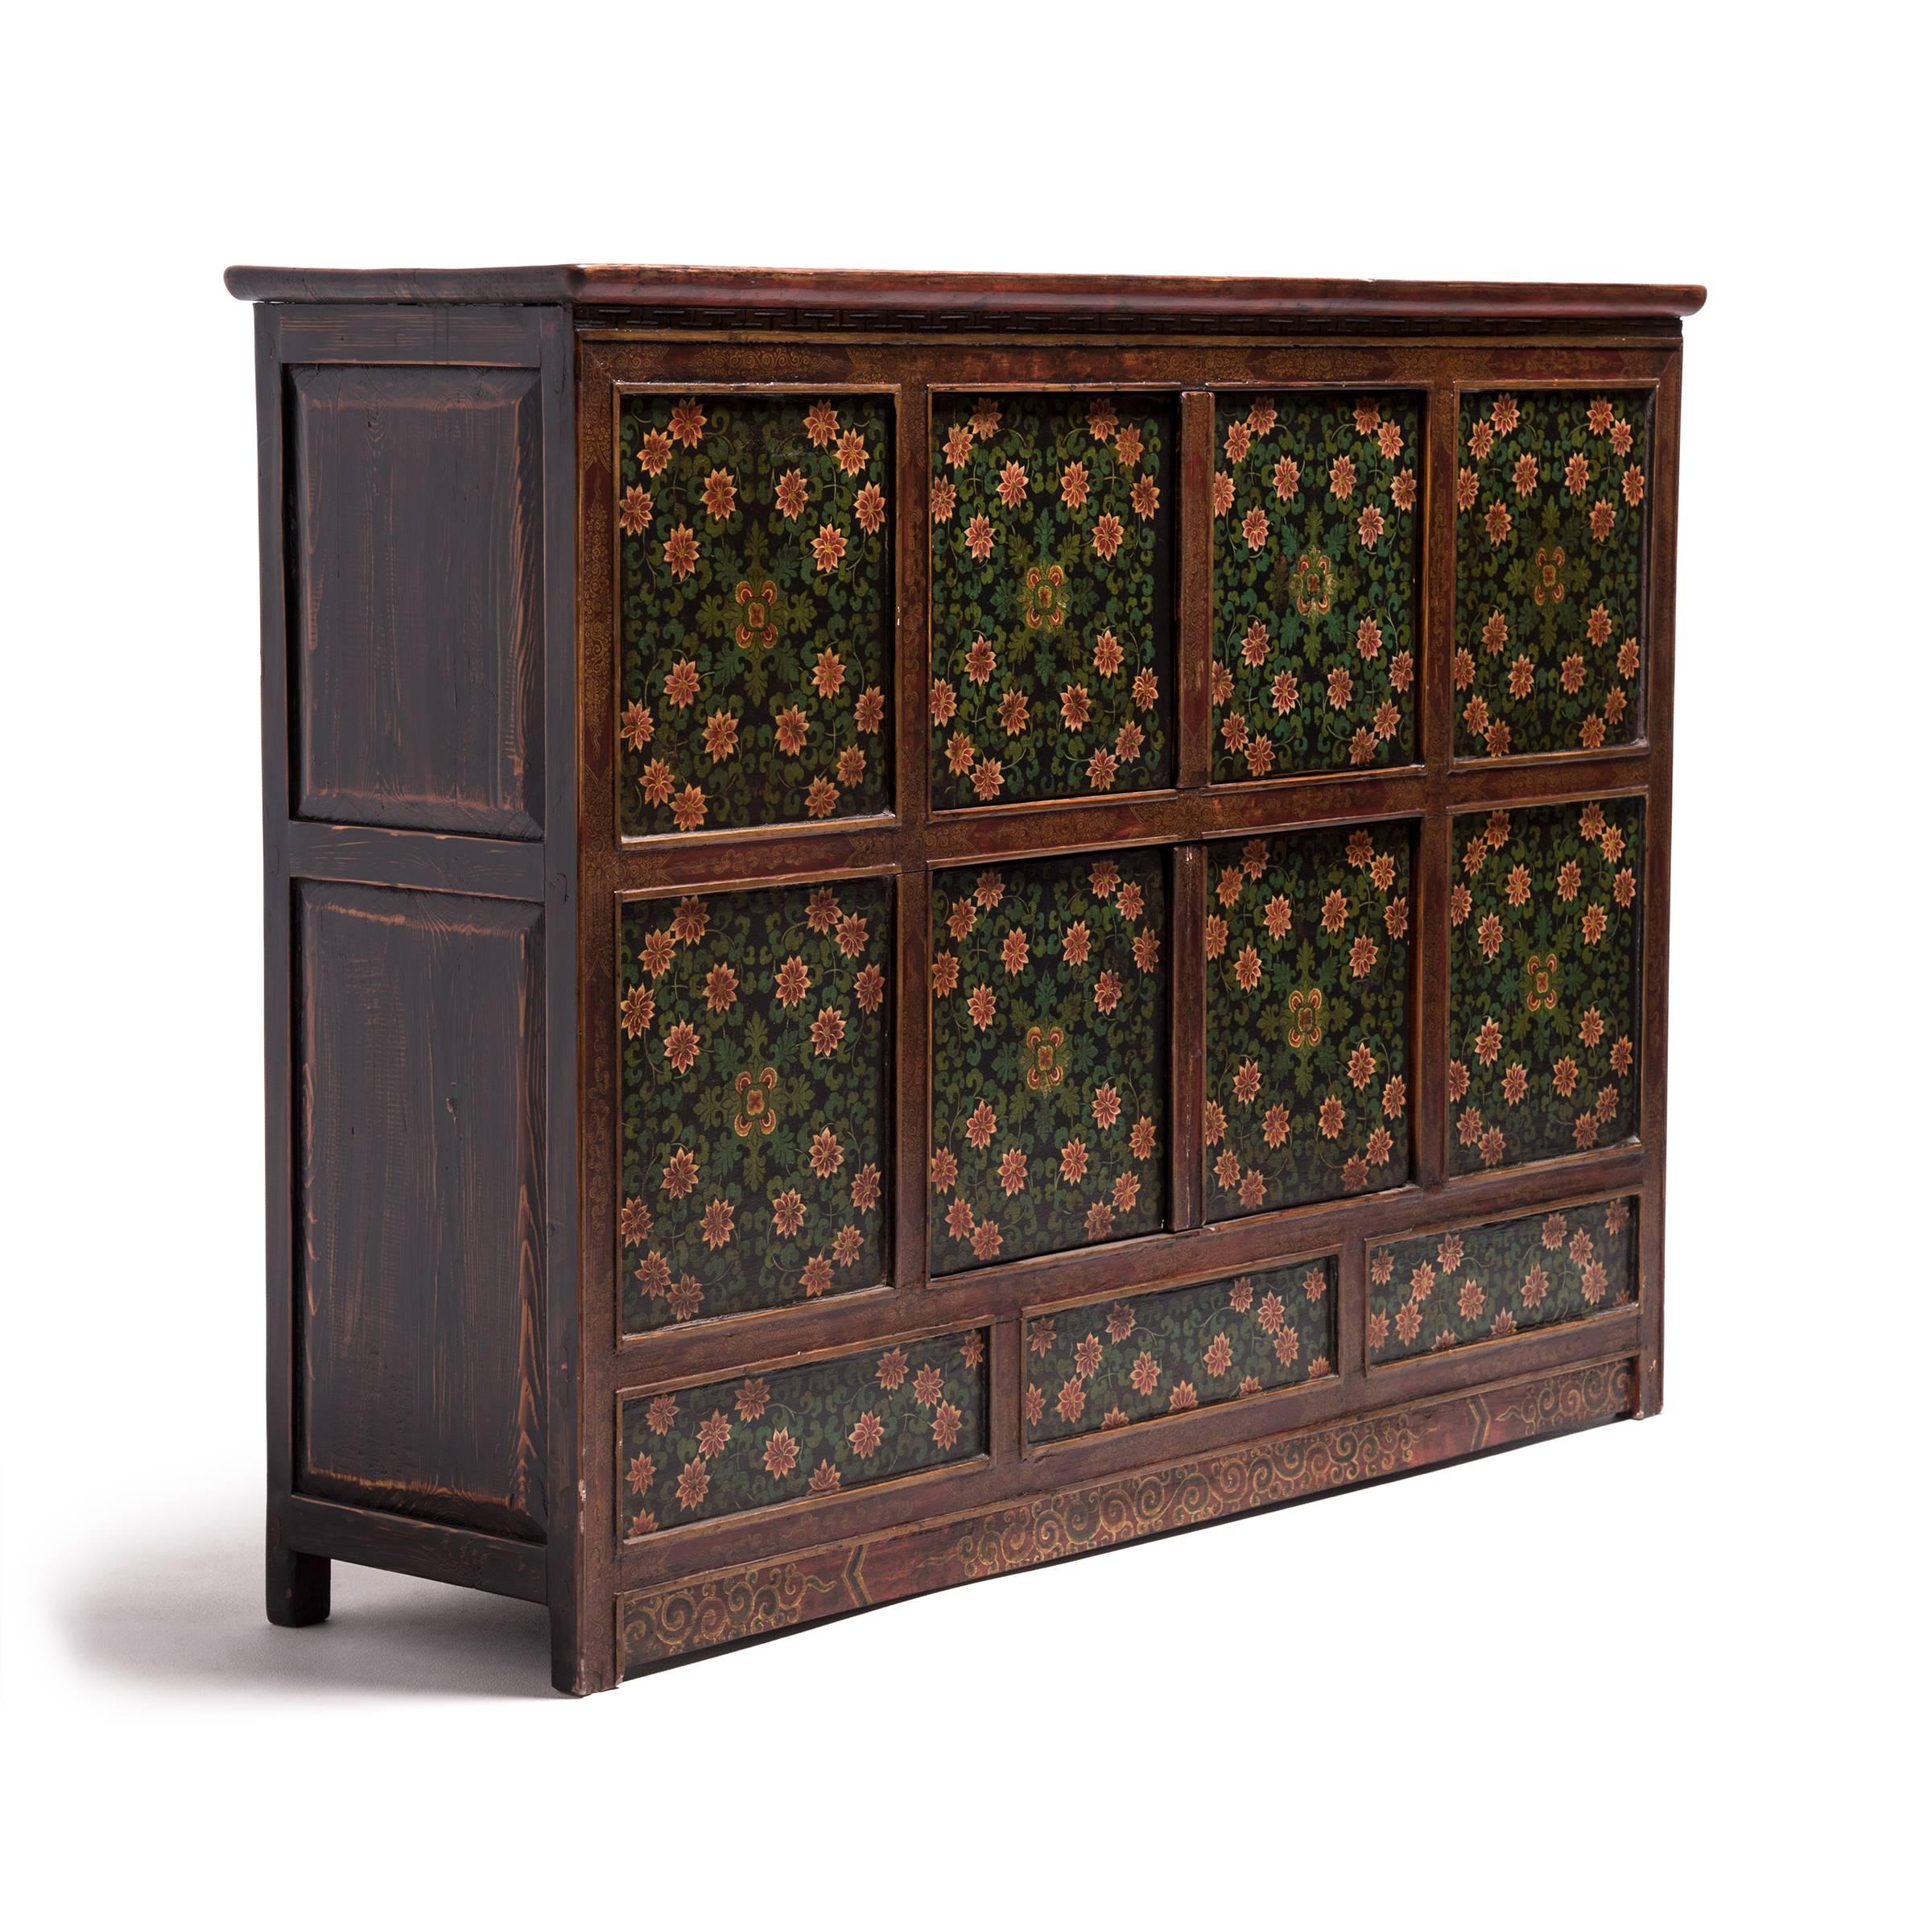 Influenced by early 19th century Tibetan painted wood furniture and panels created in monasteries, this early 20th century cabinet is lavishly decorated with painted floral motifs that reference Buddhist iconography. Paneled doors depict trailing